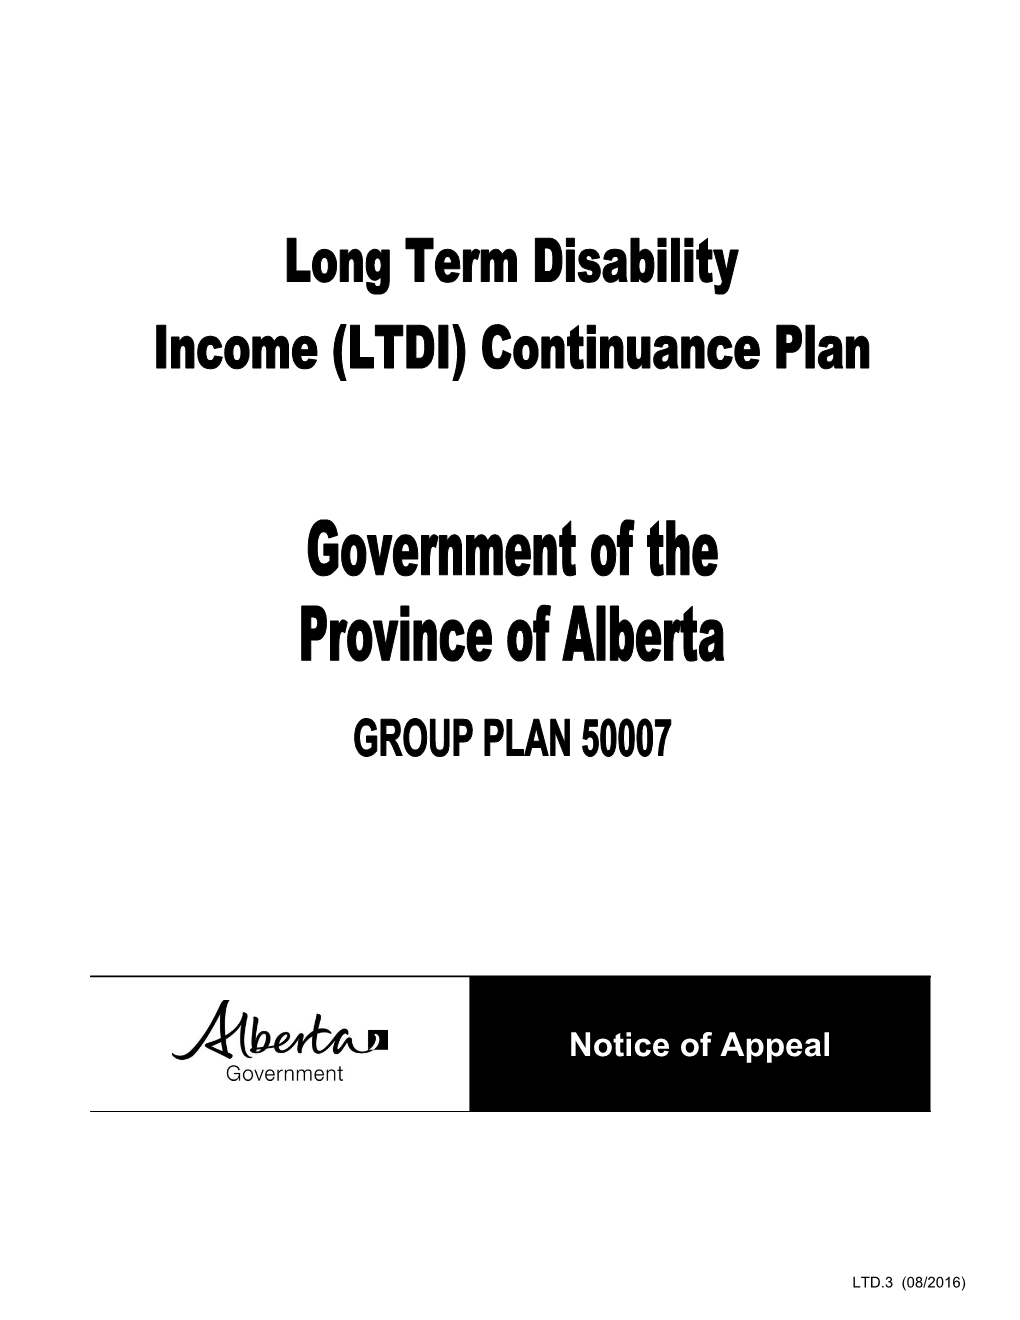 LTDI Continuance Plan - Notice of Appeal